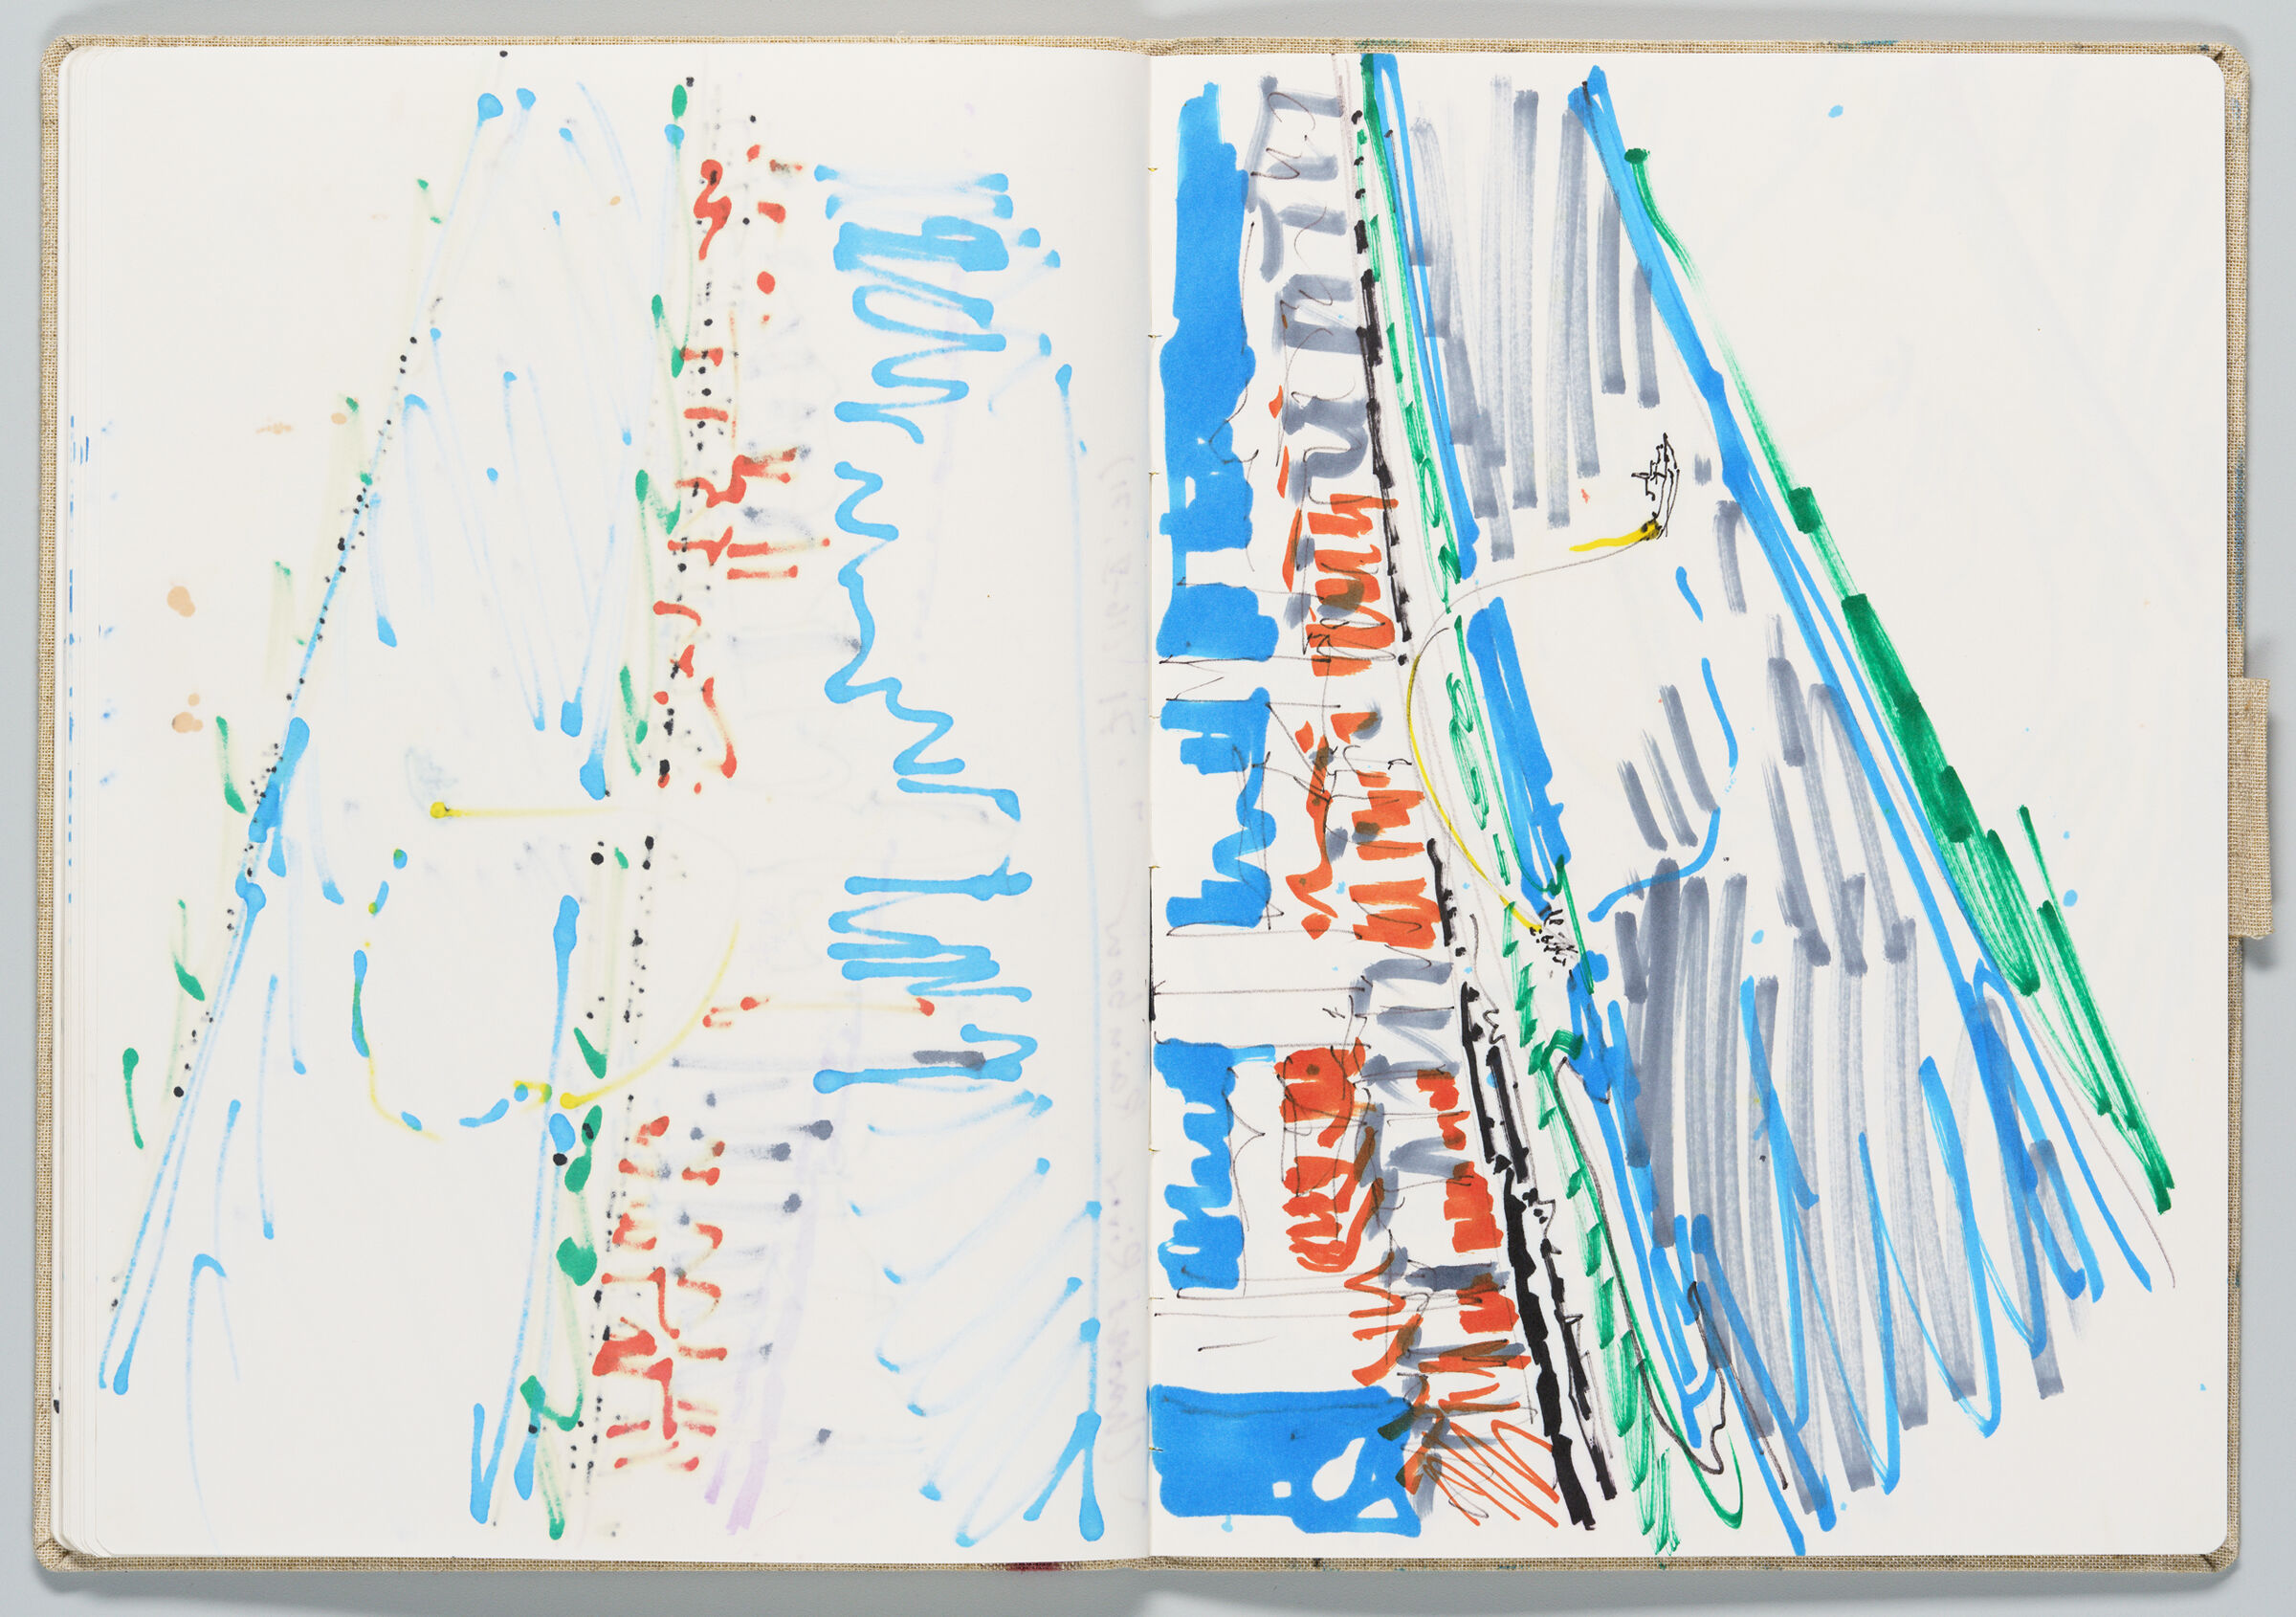 Untitled (Bleed-Through Of Previous Page With Color Transfer, Left Page); Untitled (Sketch Of 